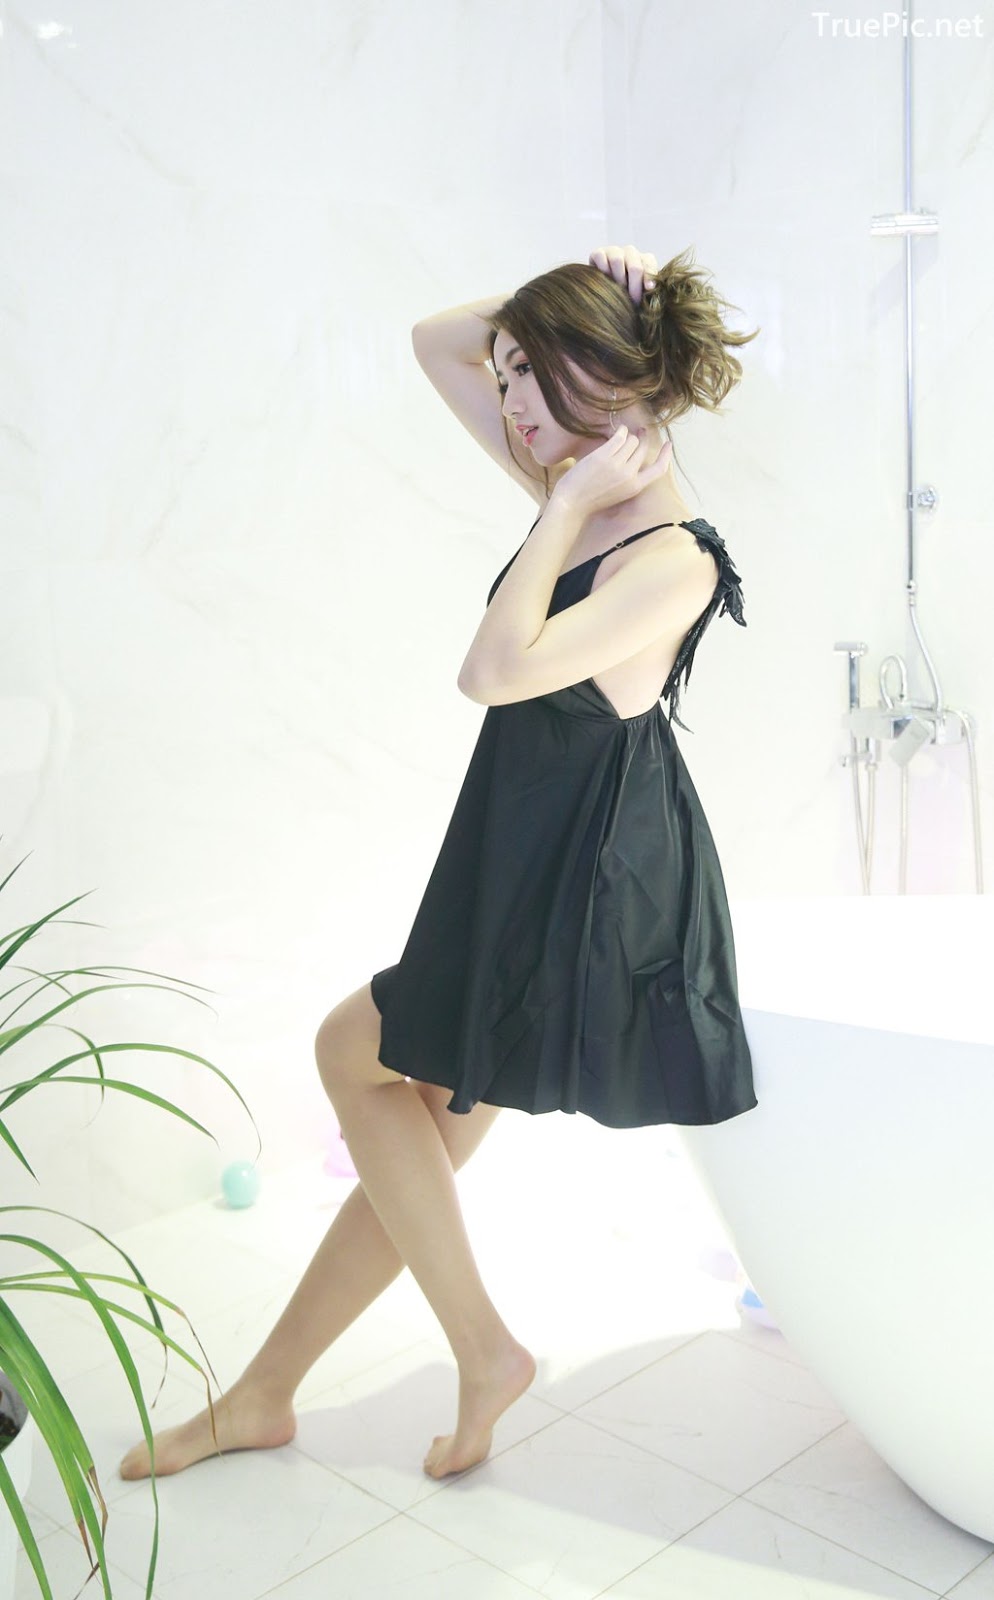 Image-Taiwanese-Model–張倫甄–Charming-Girl-With-Black-Sleep-Dress-TruePic.net- Picture-65